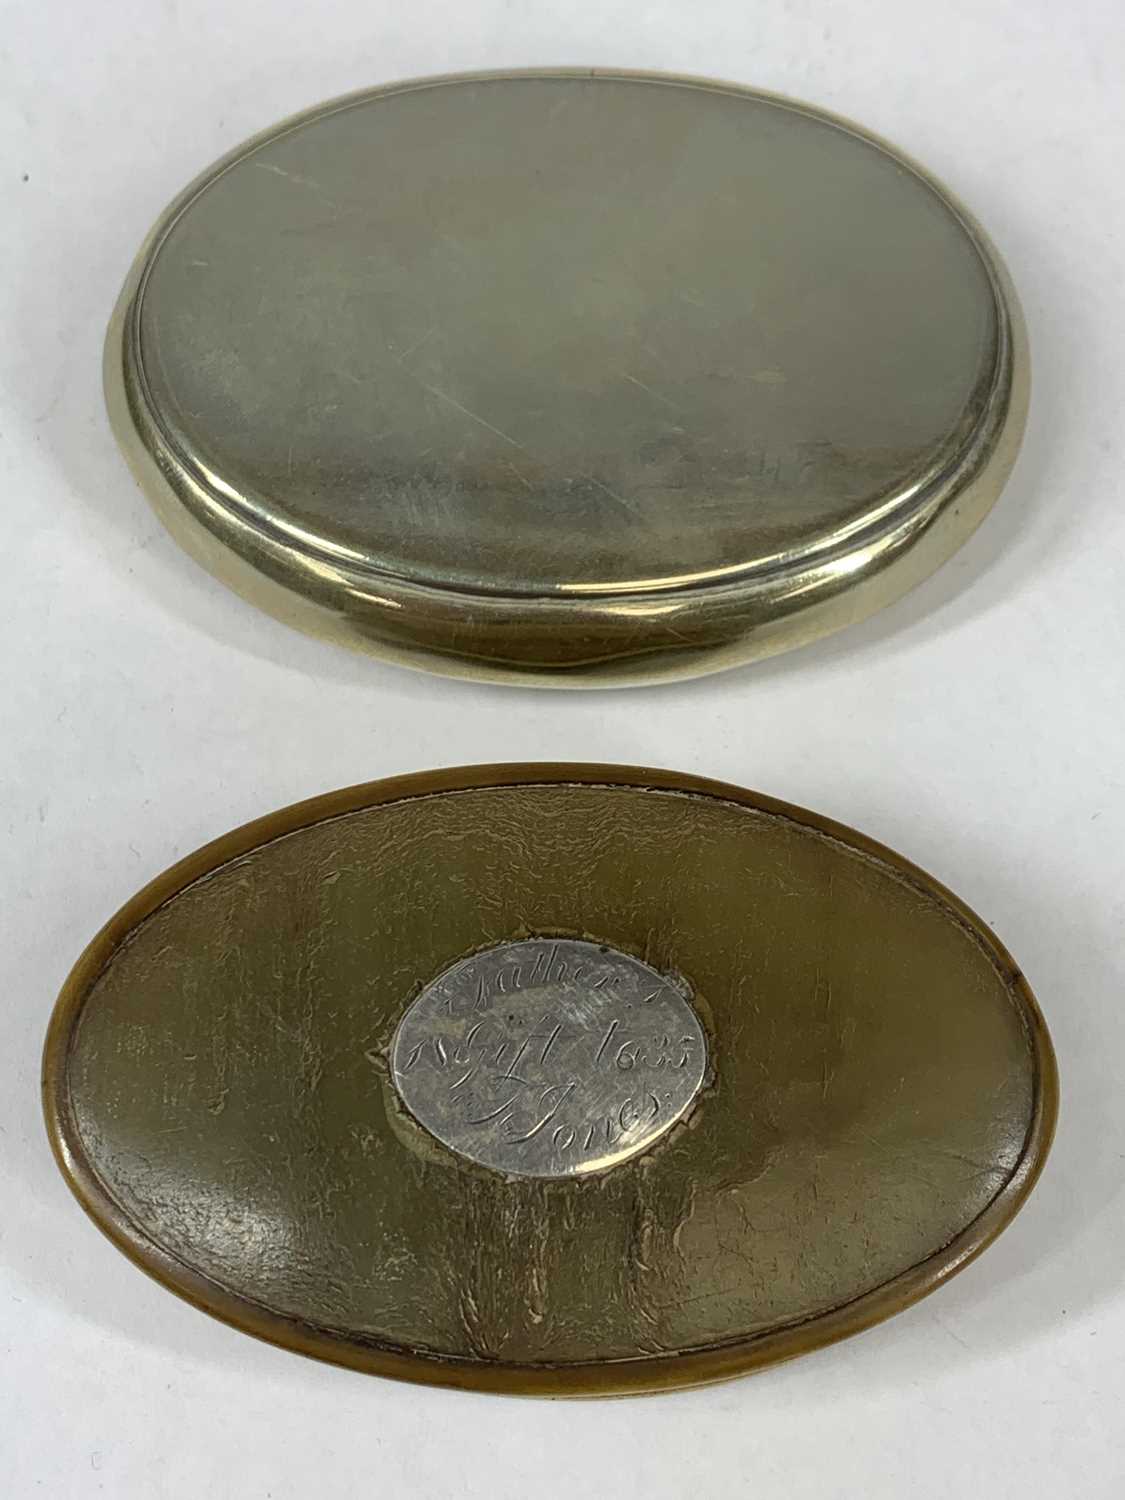 TWO ANTIQUE SNUFF BOXES - oval silver plate with hinged cover, engraved Evan Jones 1892, 9 x 6. - Image 3 of 3